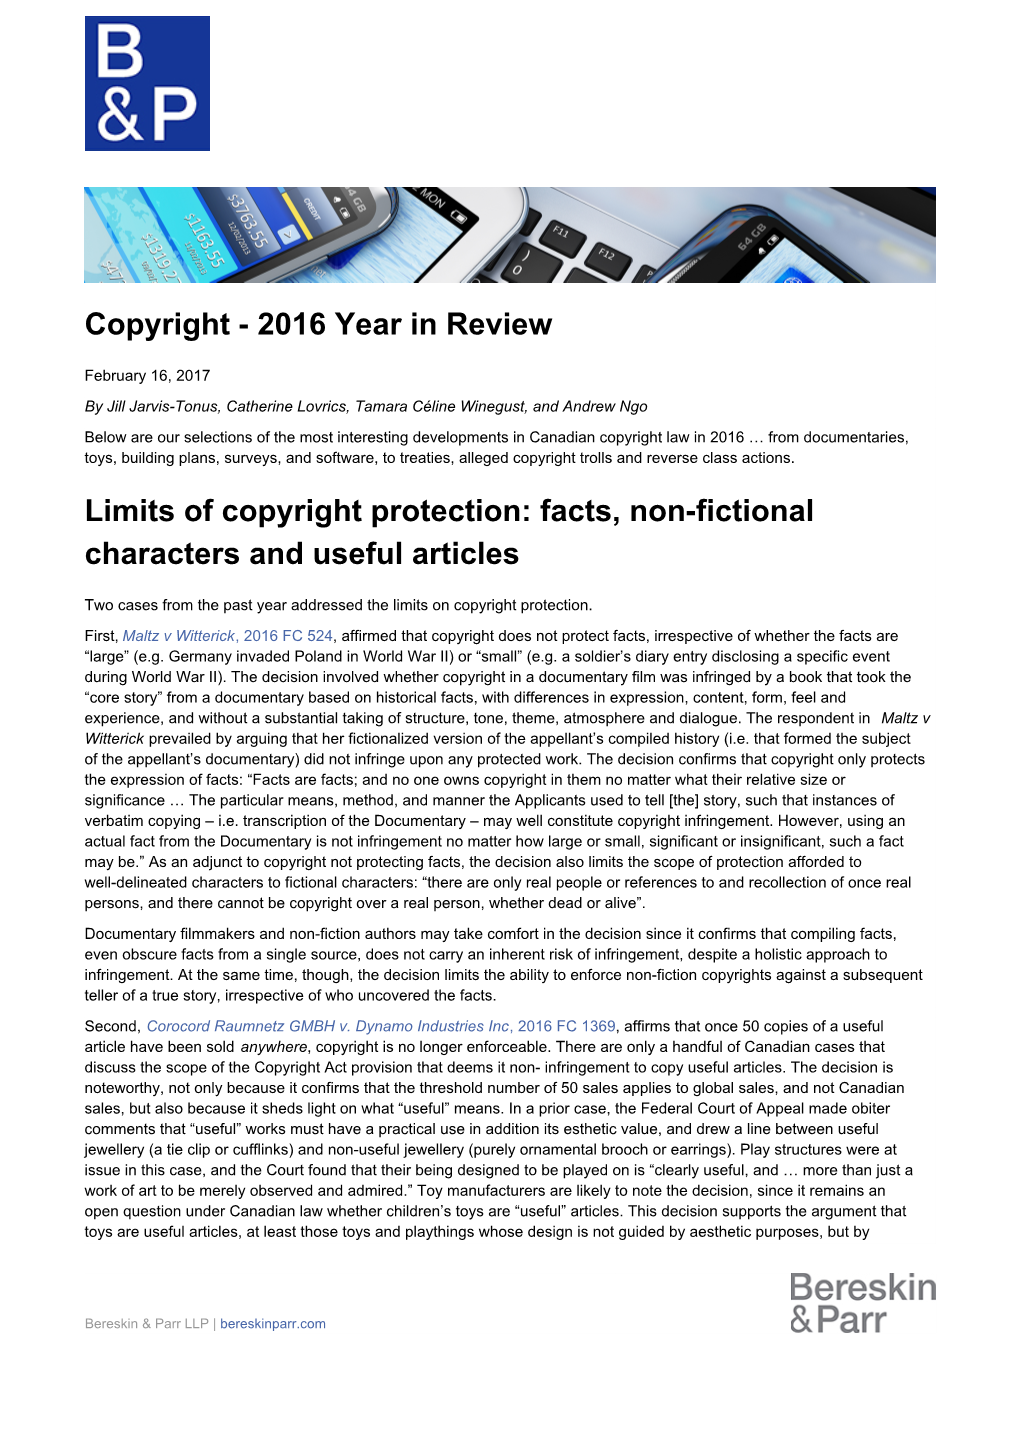 2016 Year in Review Limits of Copyright Protection: Facts, Non